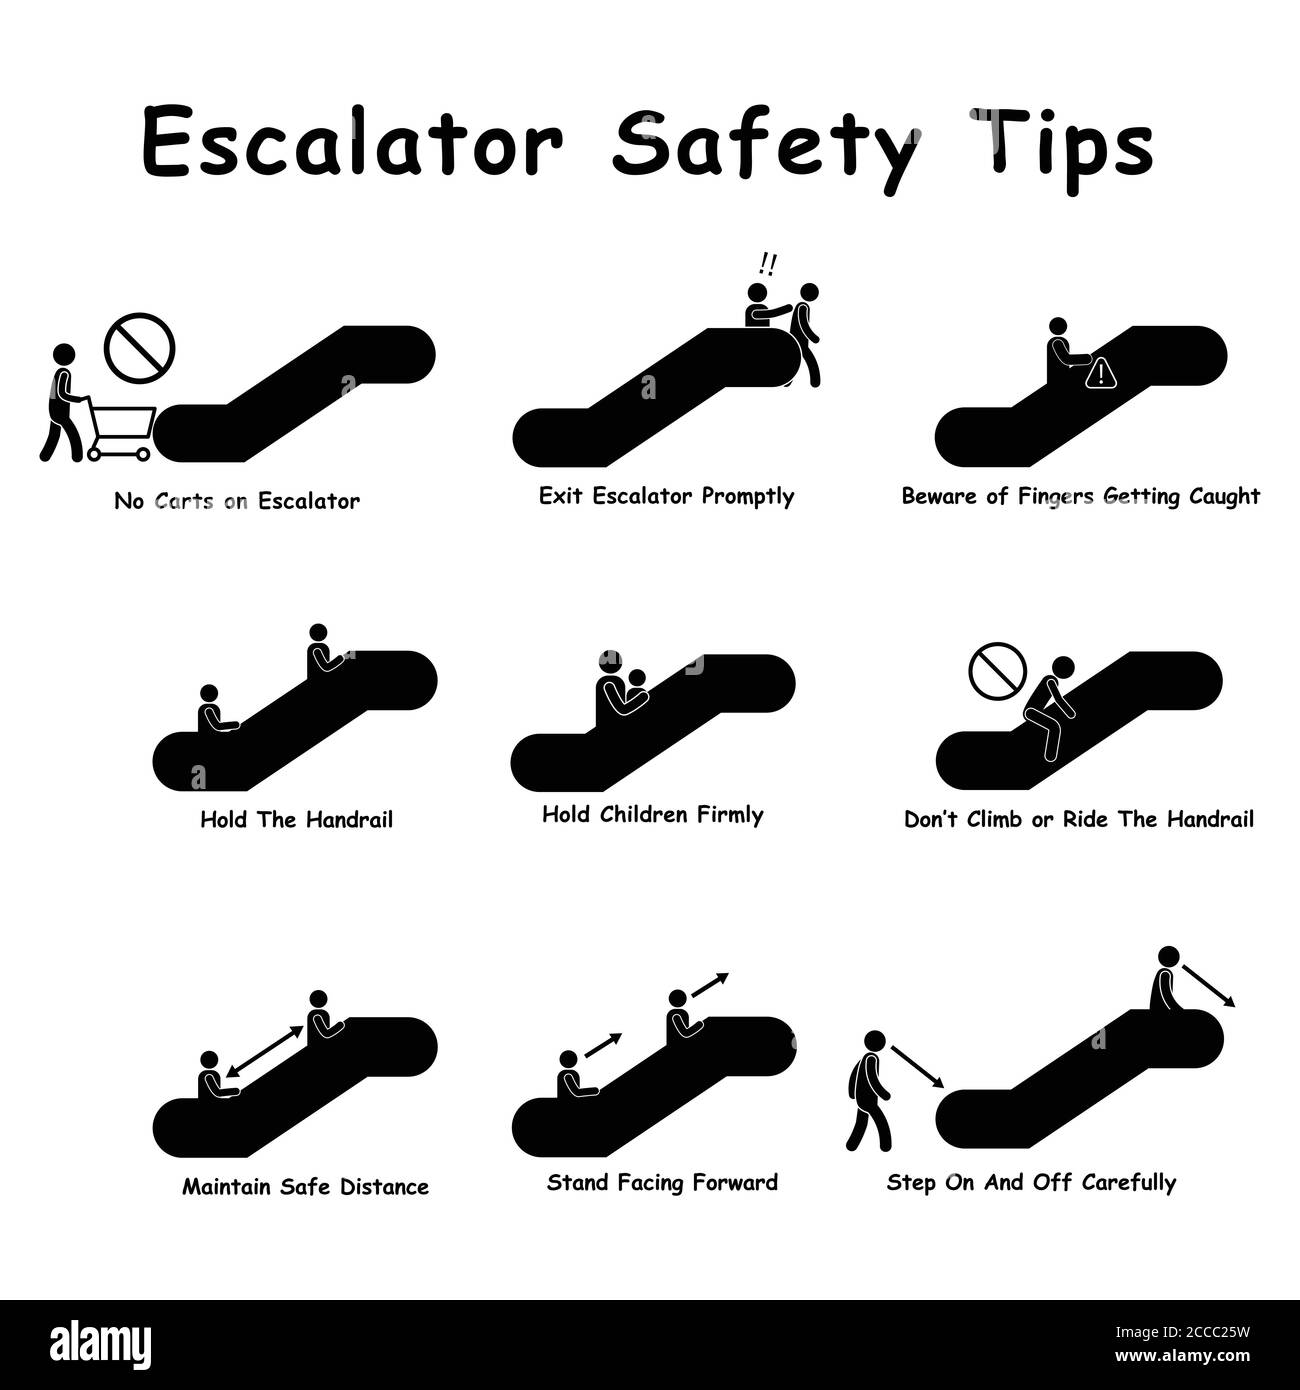 Escalator Stairways Safety Tips Precaution Measures. Black Sign Diagram Depicting Dos and Don'ts on Moving Stairs. Stock Vector